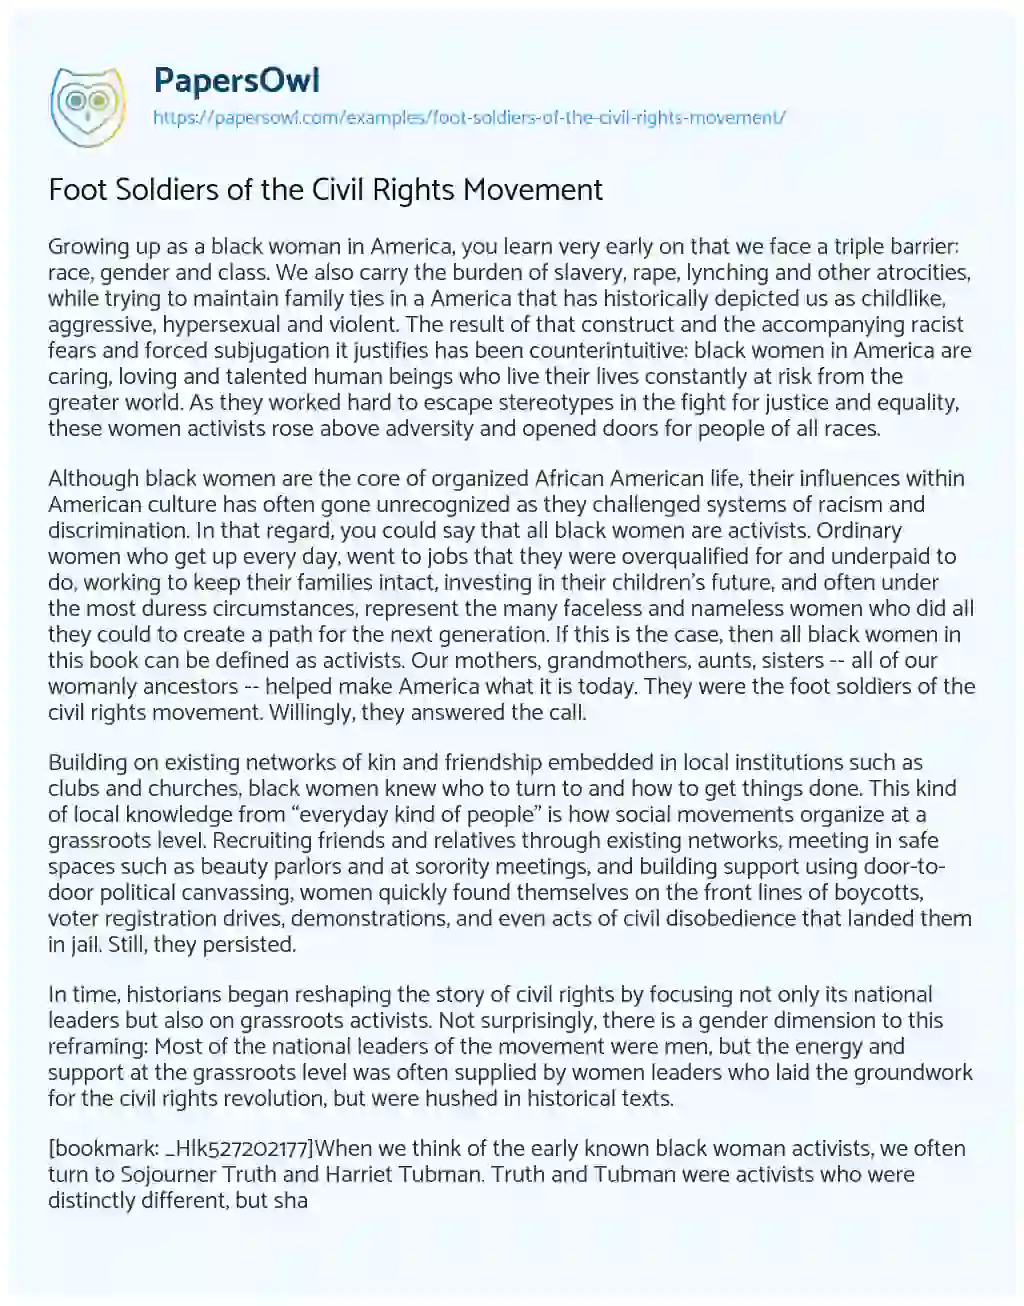 Essay on Foot Soldiers of the Civil Rights Movement